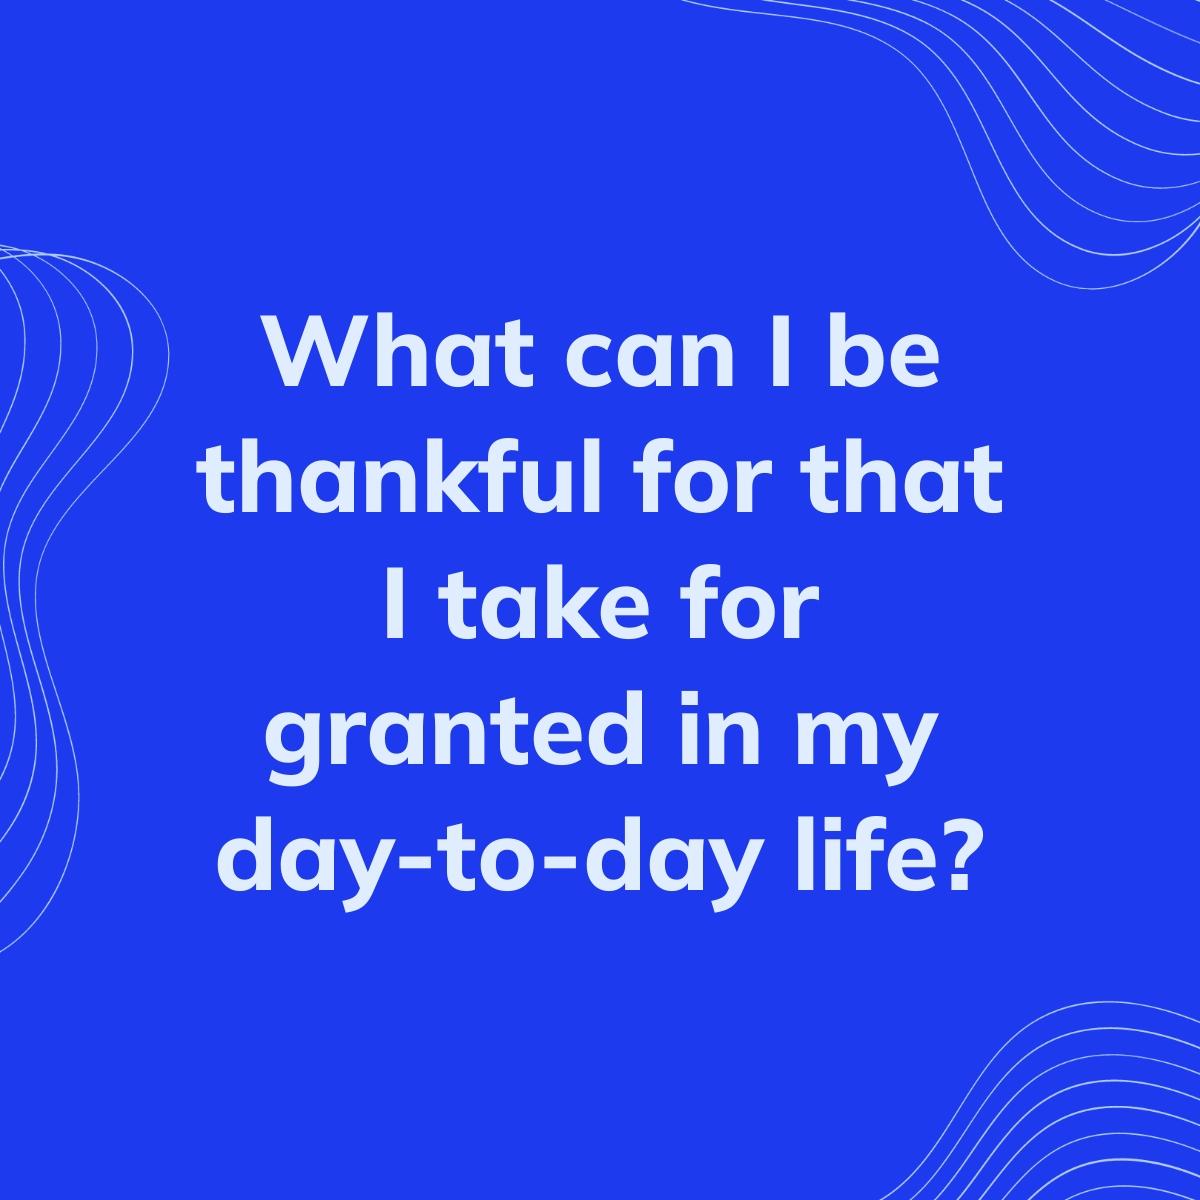 Journal Prompt: What can I be thankful for that I take for granted in my day-to-day life?